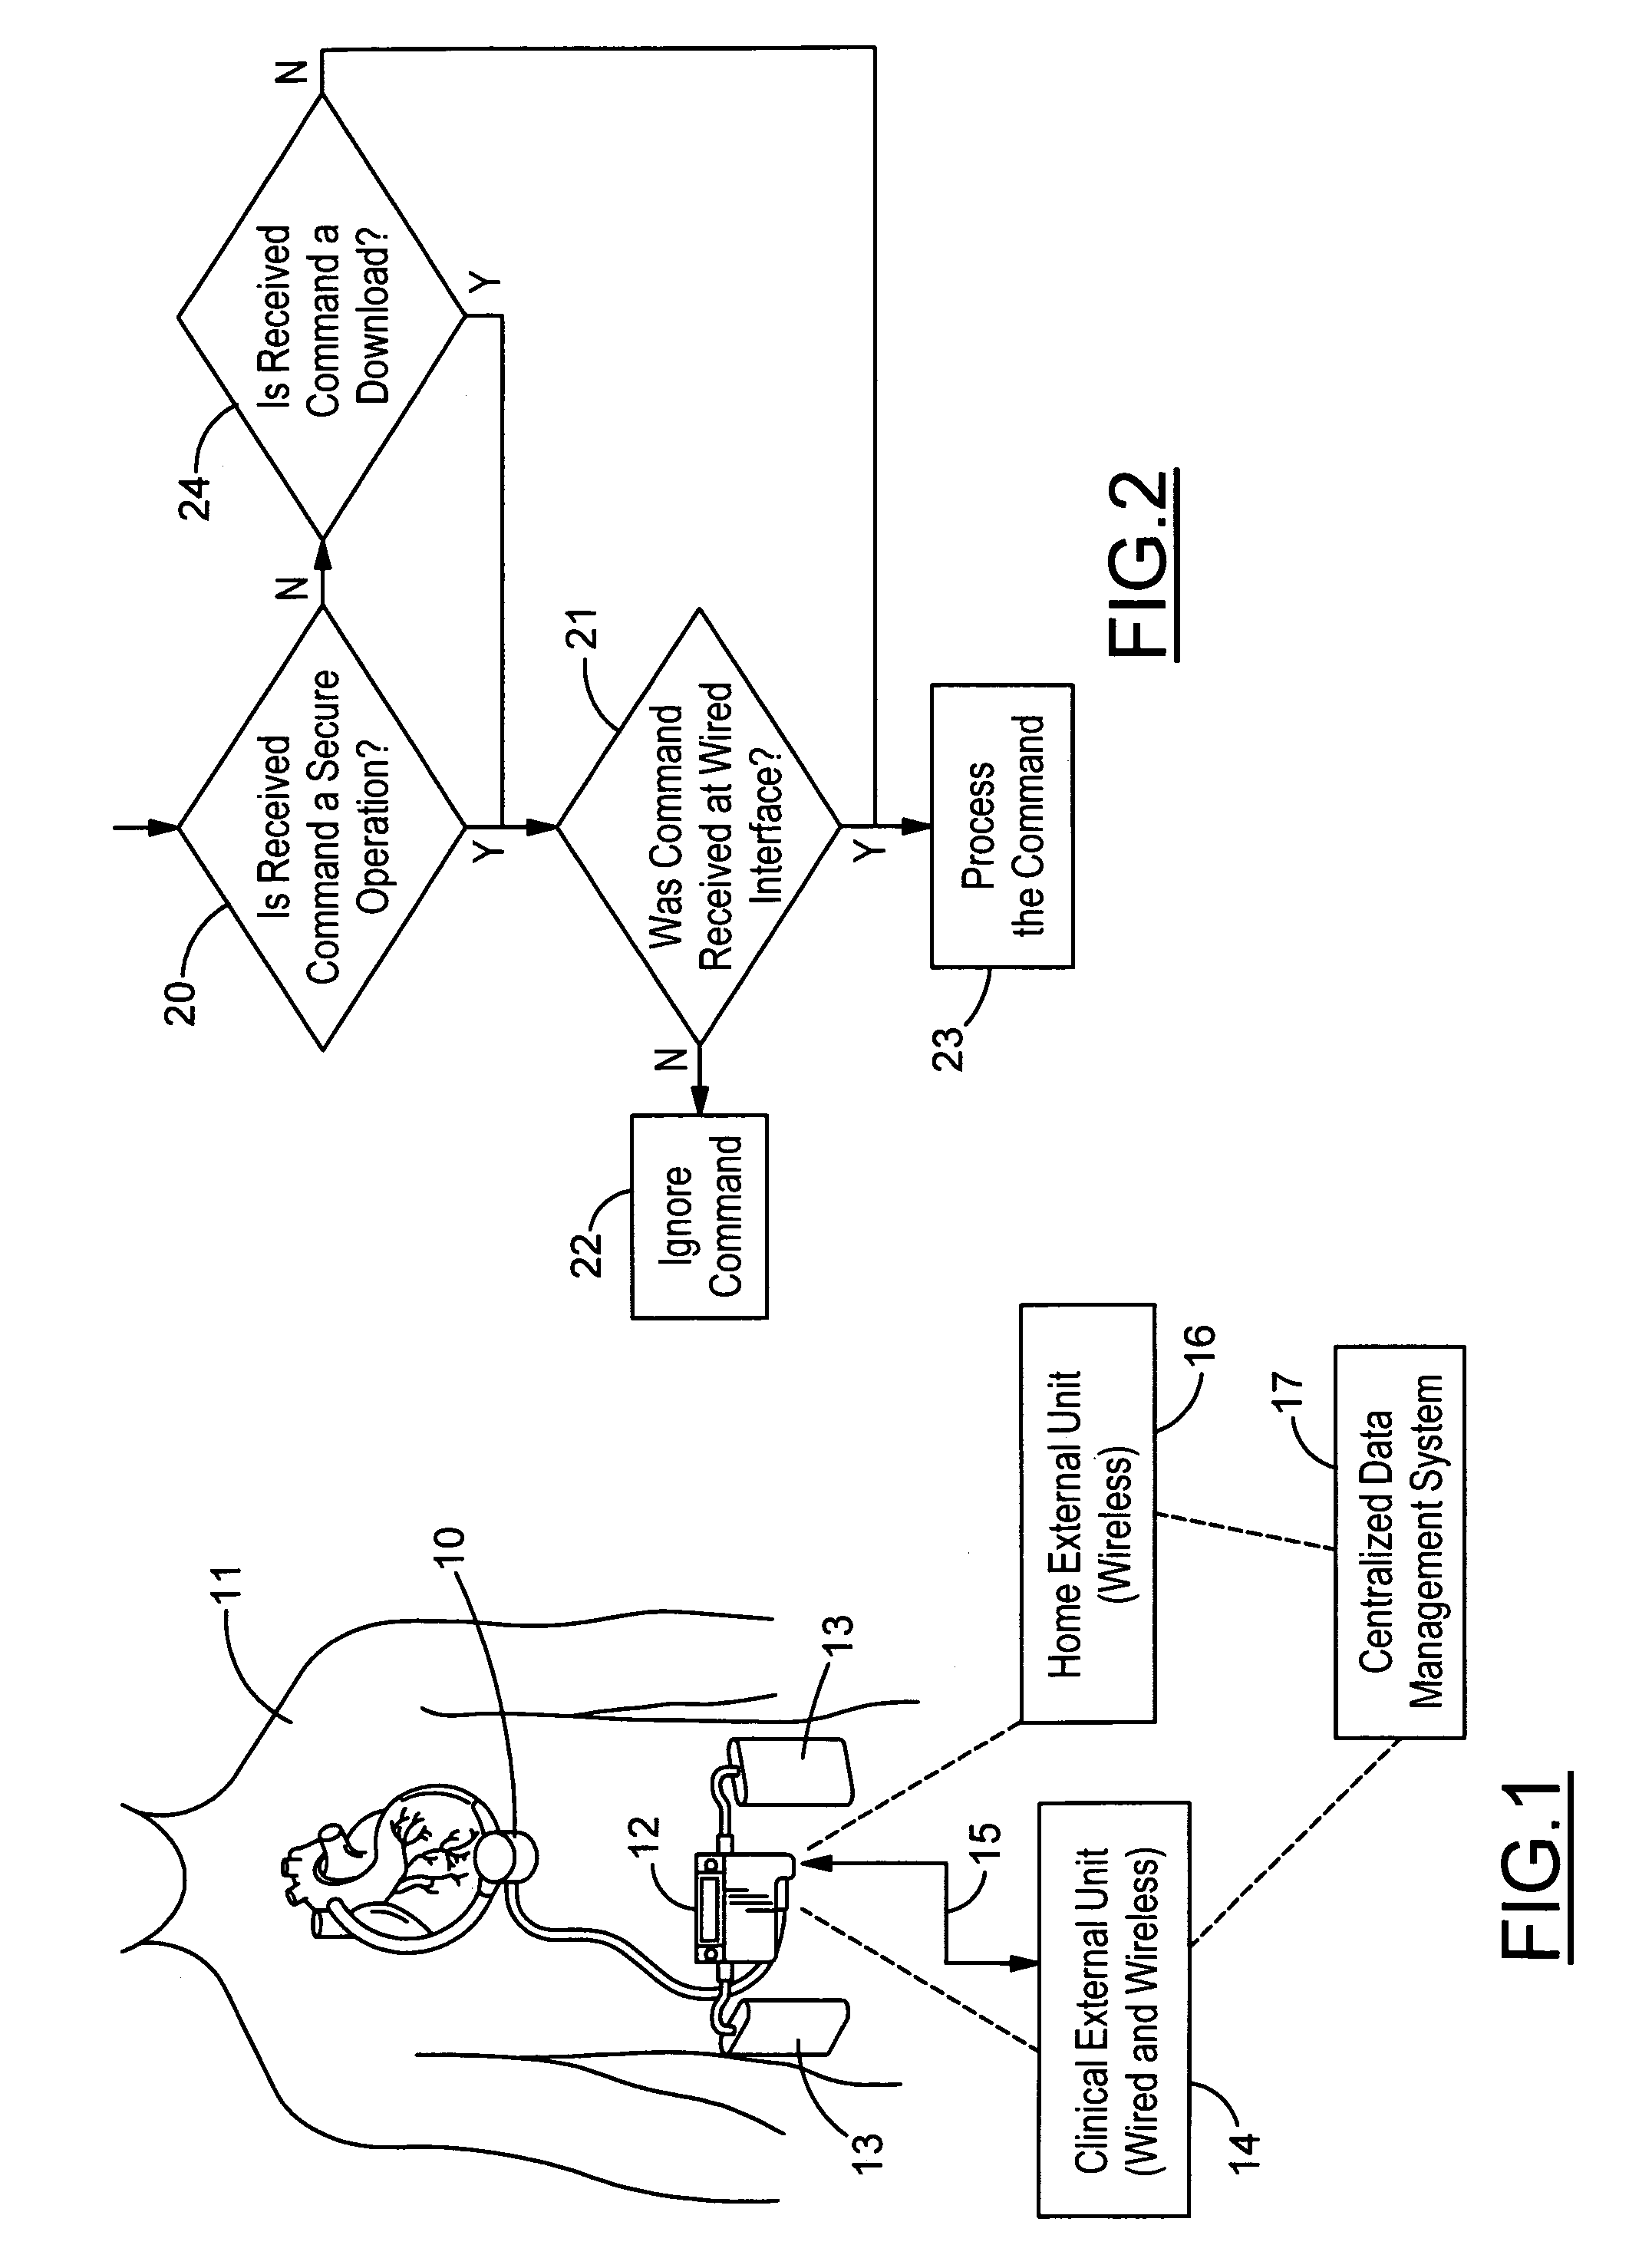 Dual communication interface for artificial heart system